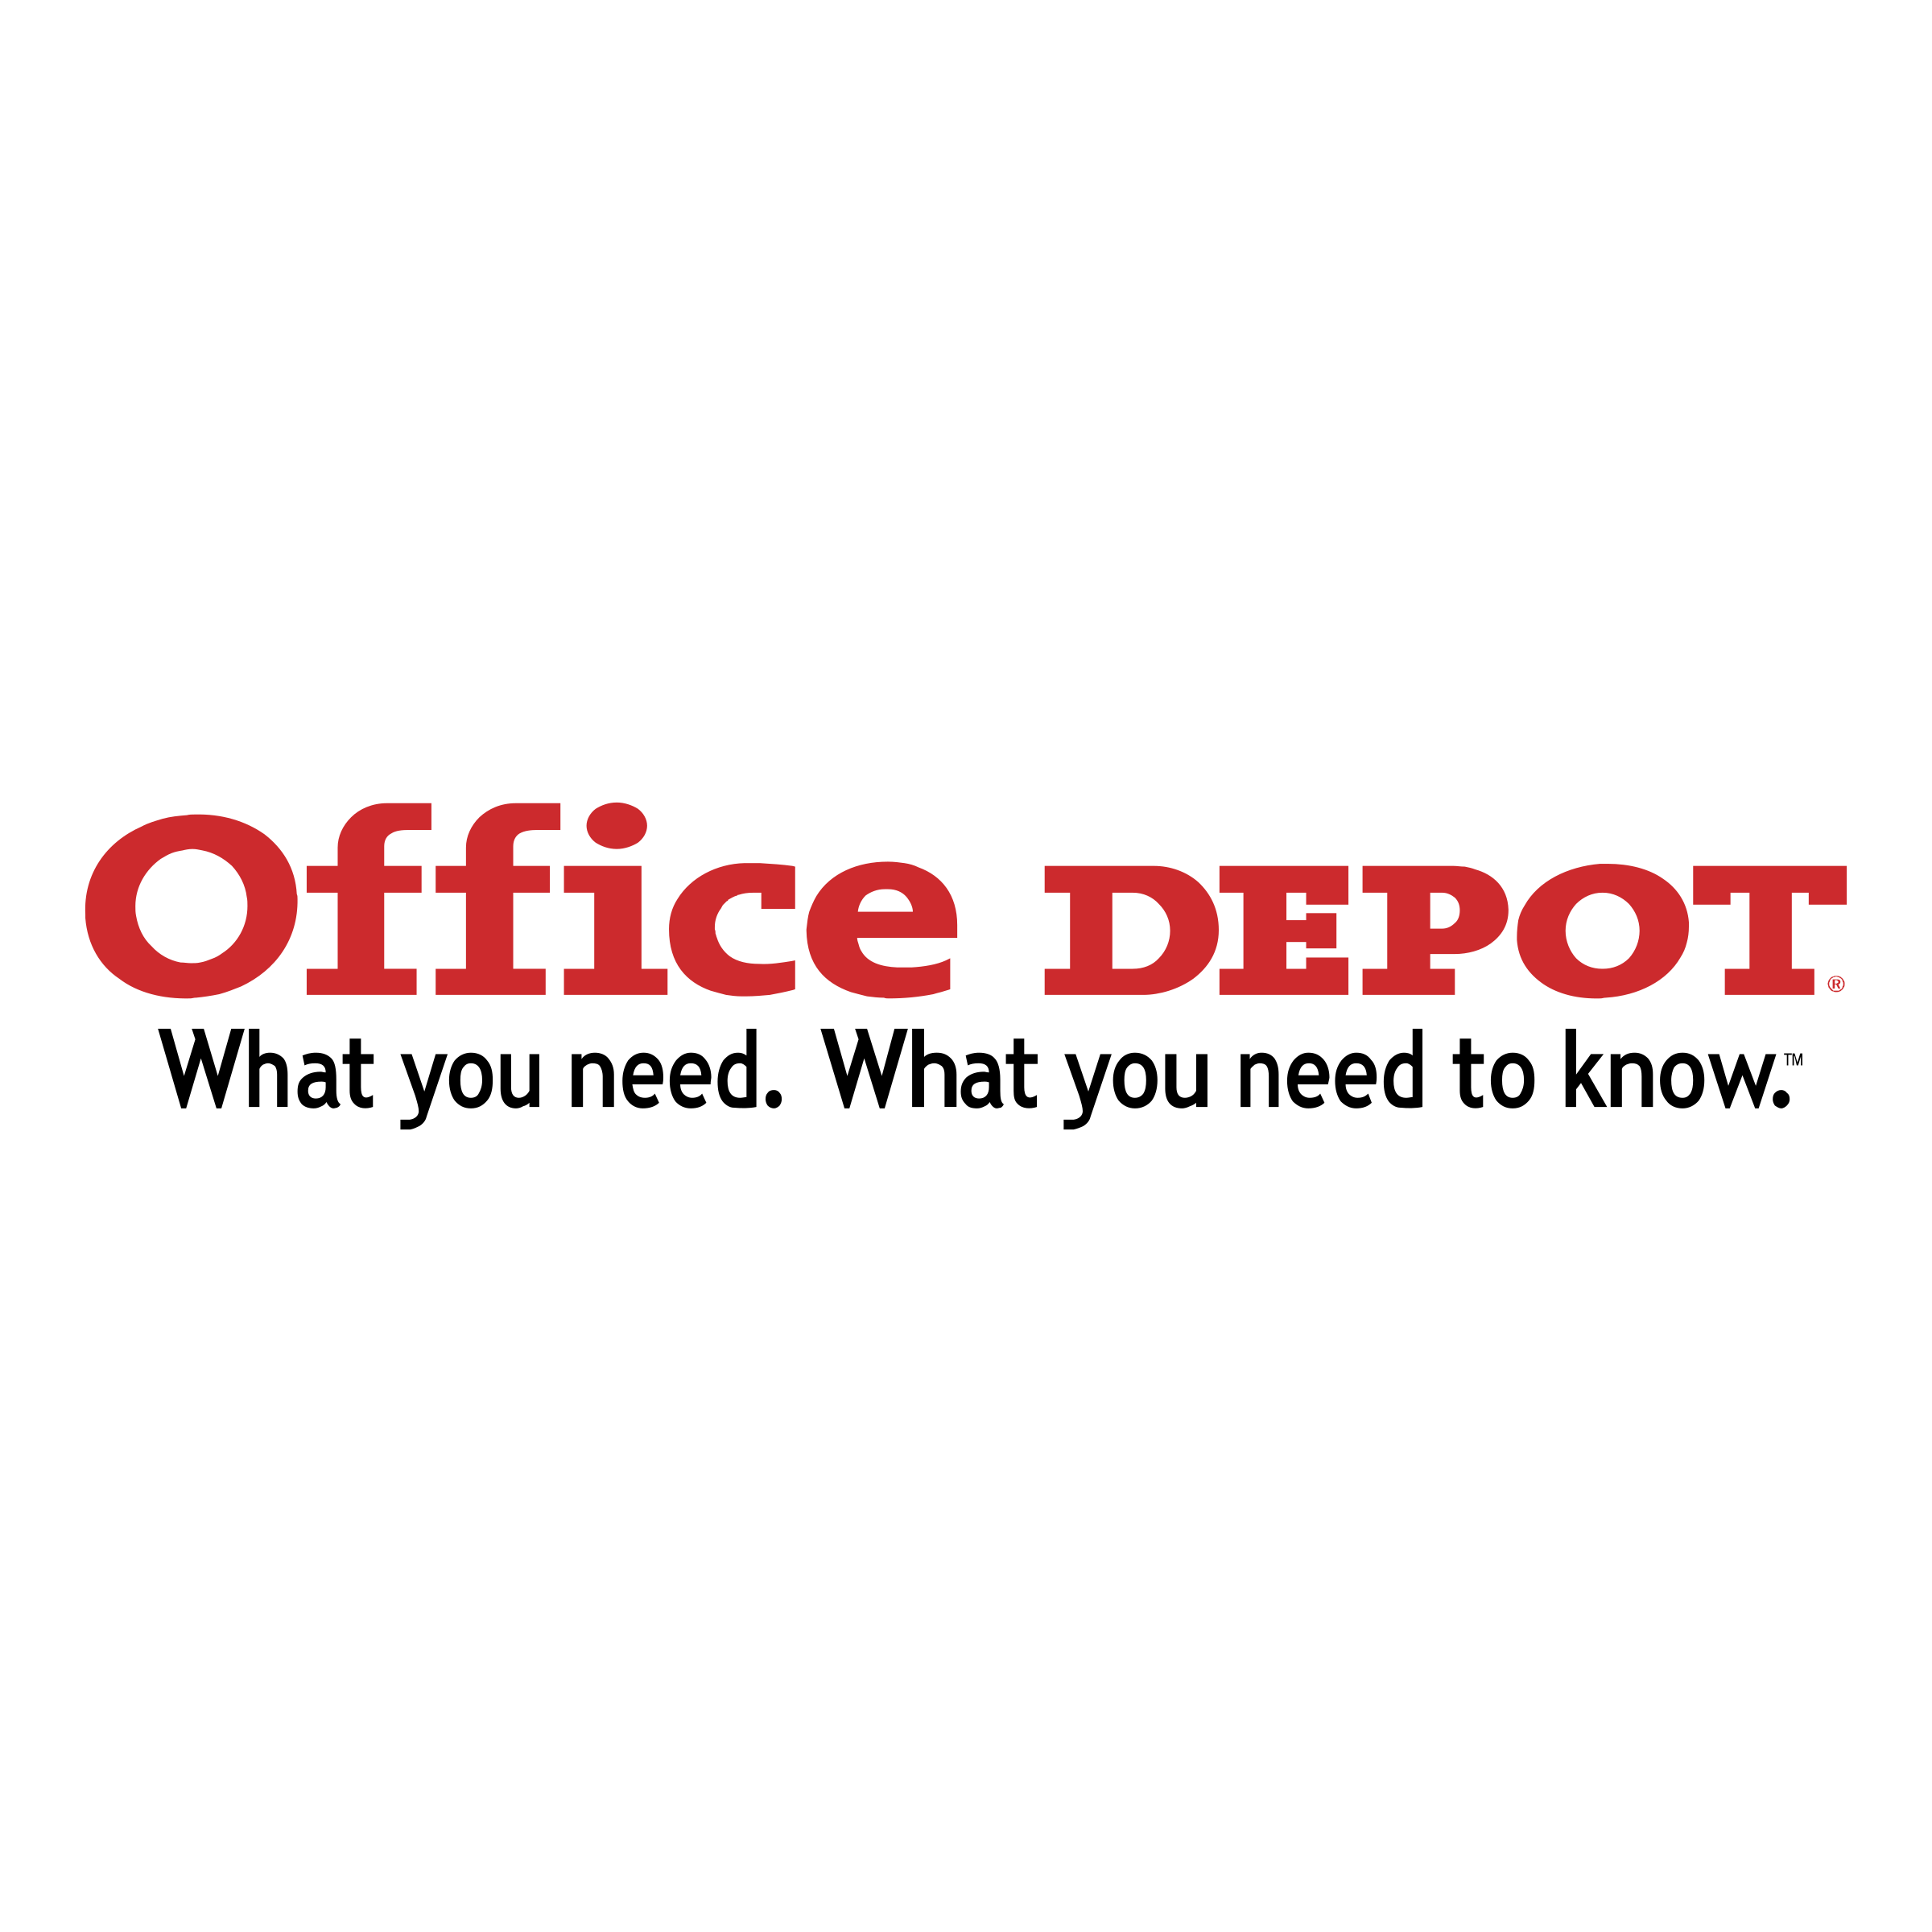 Office Png Images | Vector An